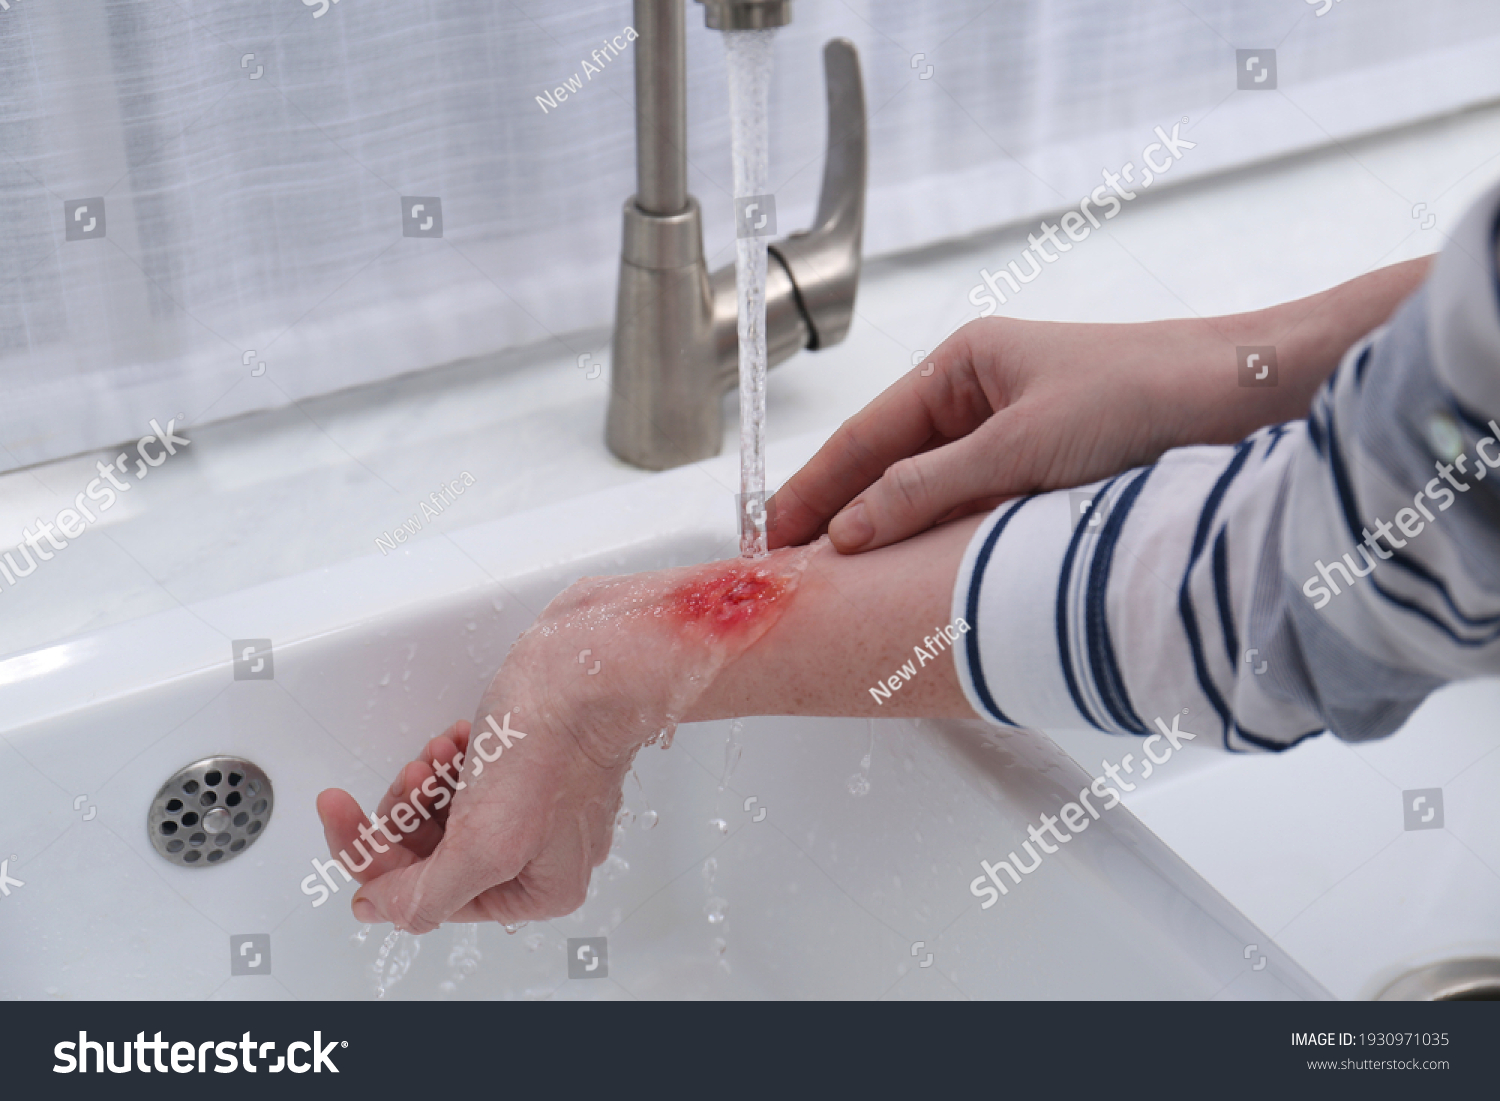 Woman holding forearm with burn under flowing water indoors, closeup #1930971035